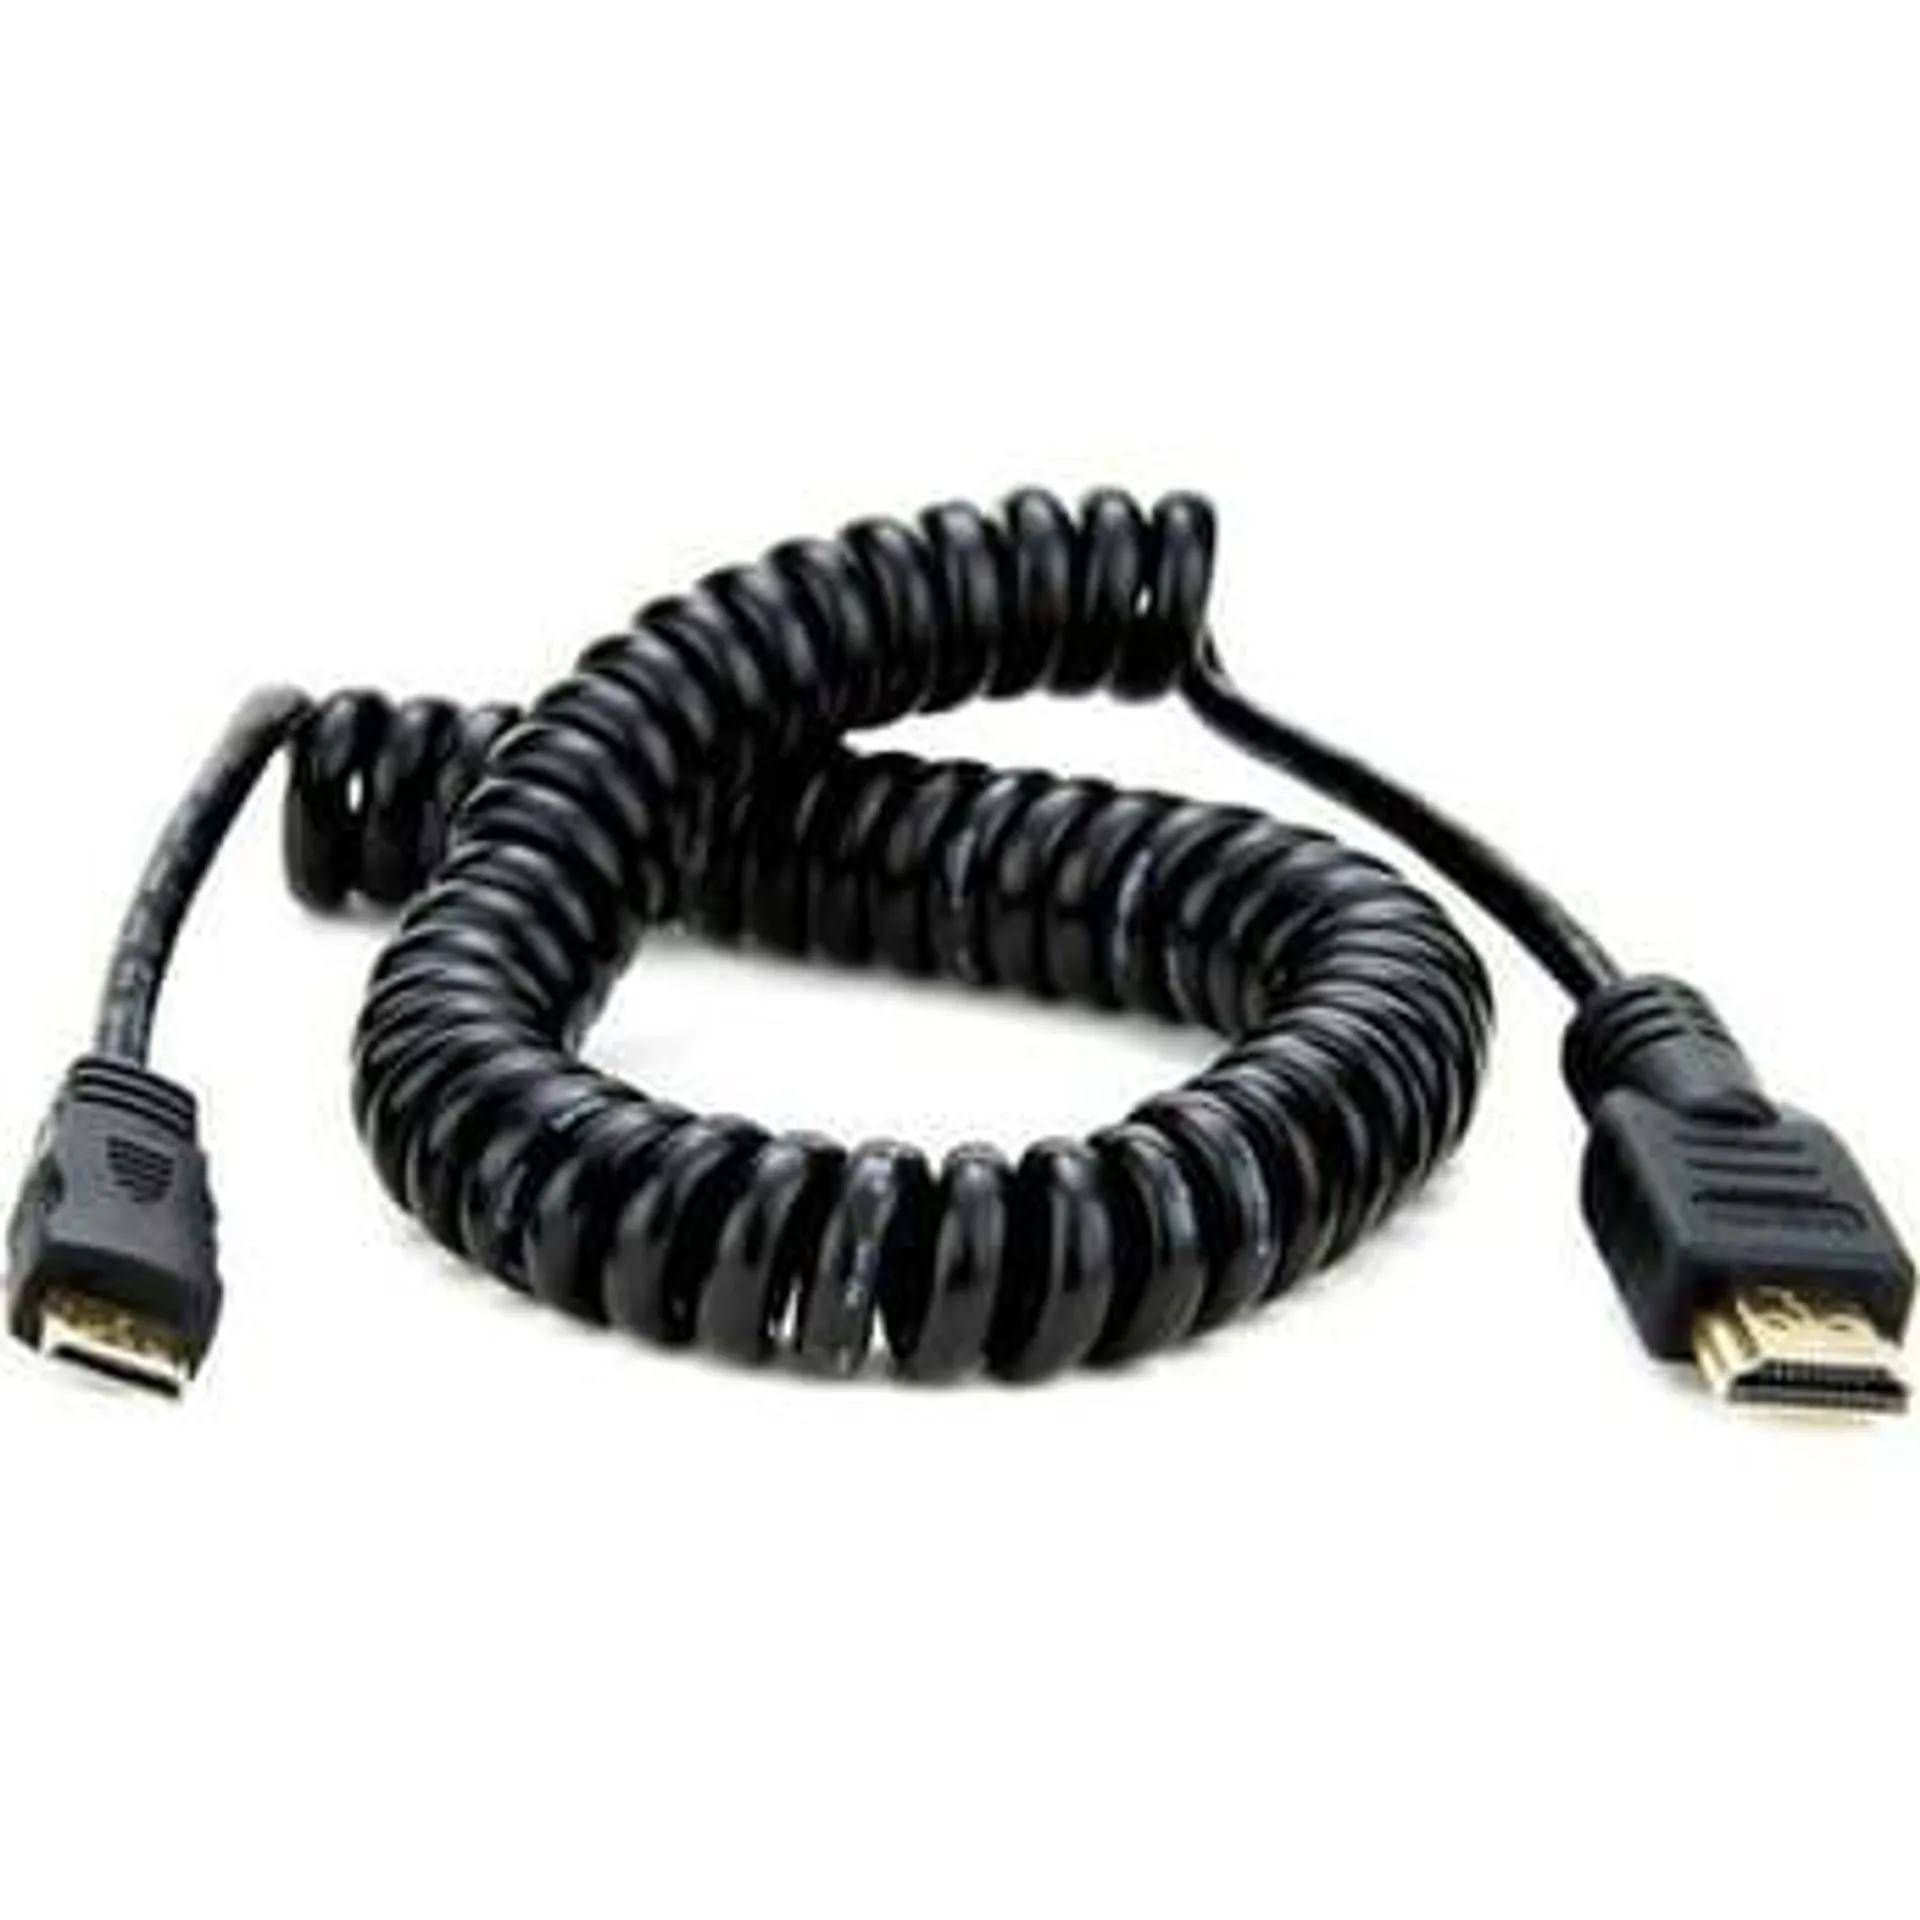 Atomos Coiled Mini to Full HDMI Cable (50cm)